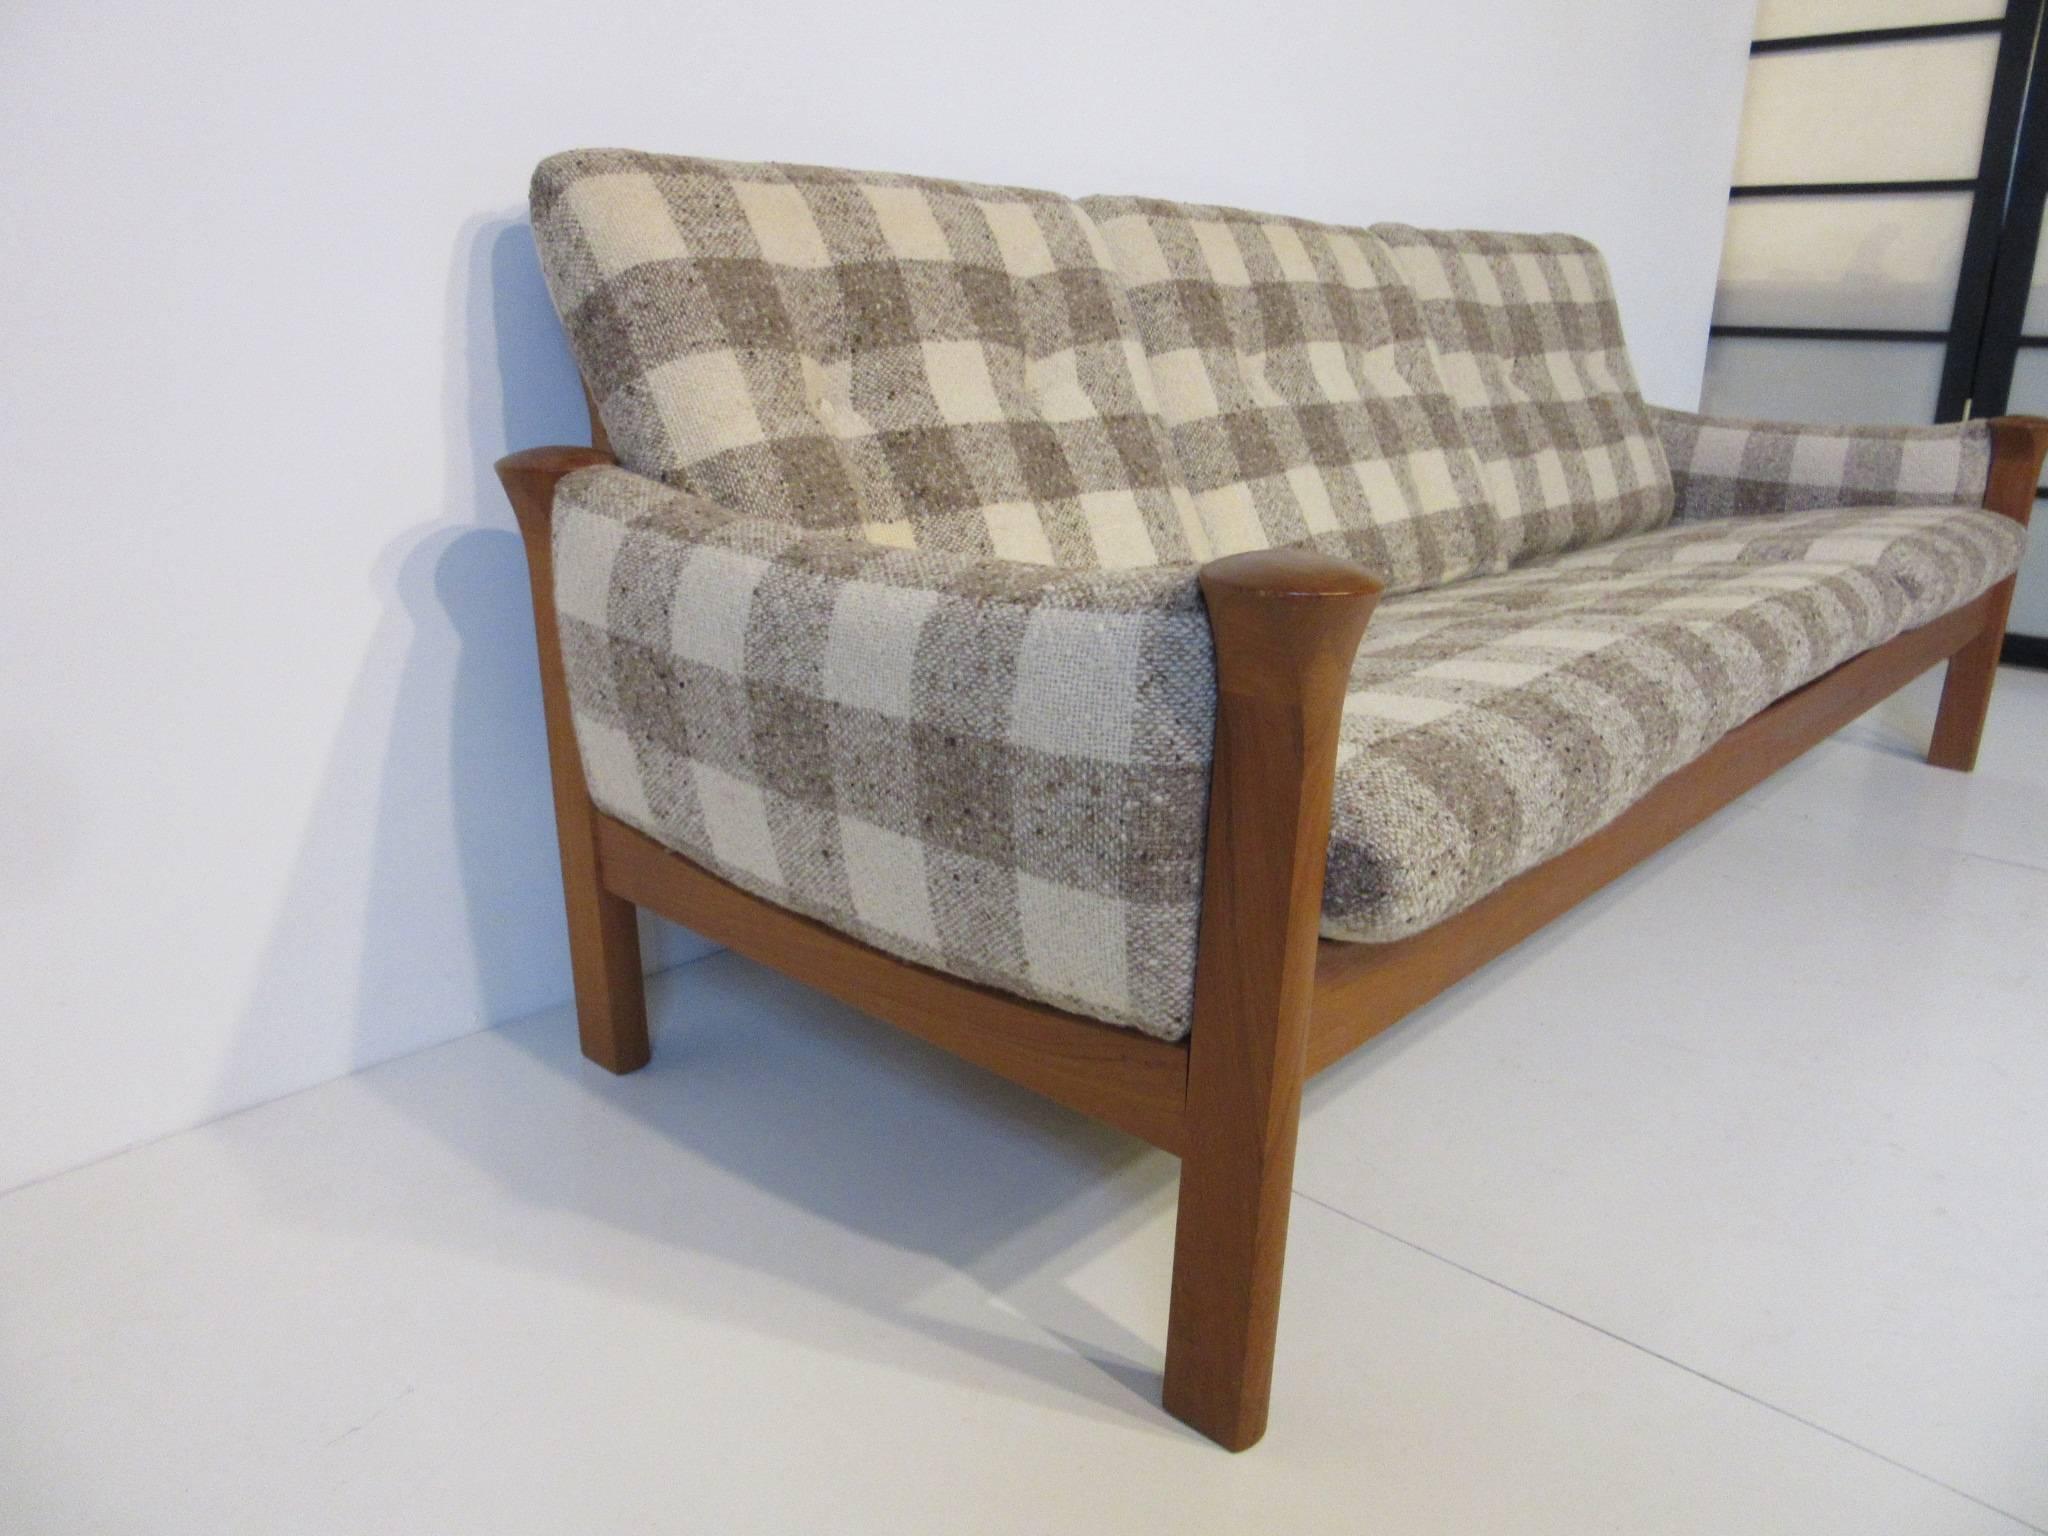 A teak wood sofa upholstered in a soft oat meal textured cream and mocha Buffalo plaid fabric, retains the manufactures tag by Cado made in Denmark.